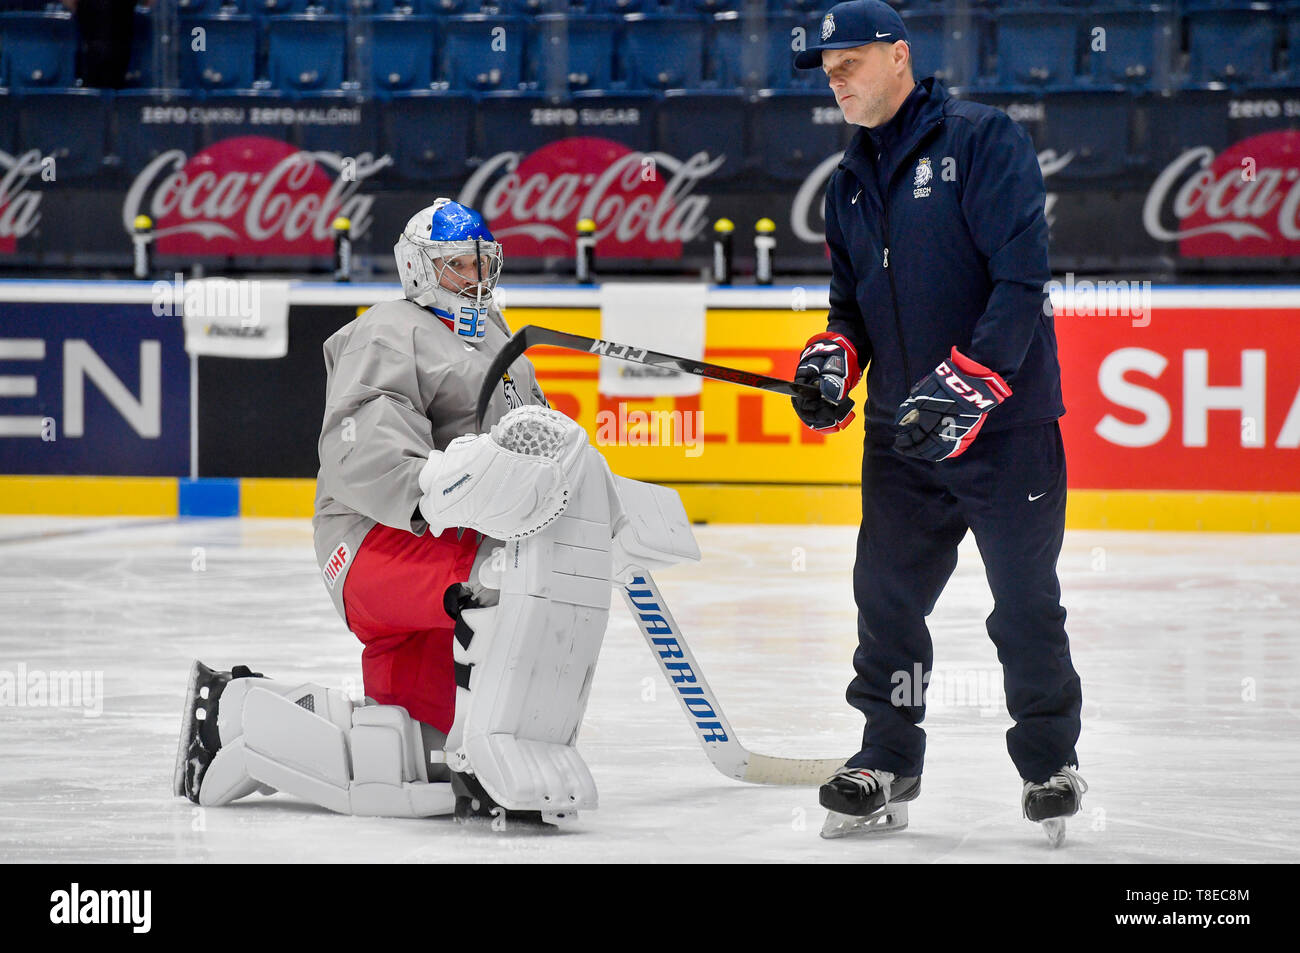 Czech ice hockey goalkeeper Pavel Francouz and goalkeepers coach Zdenek Orct at a training session of the Czech national team prior to todays match against Russia at the 2019 IIHF World Championship